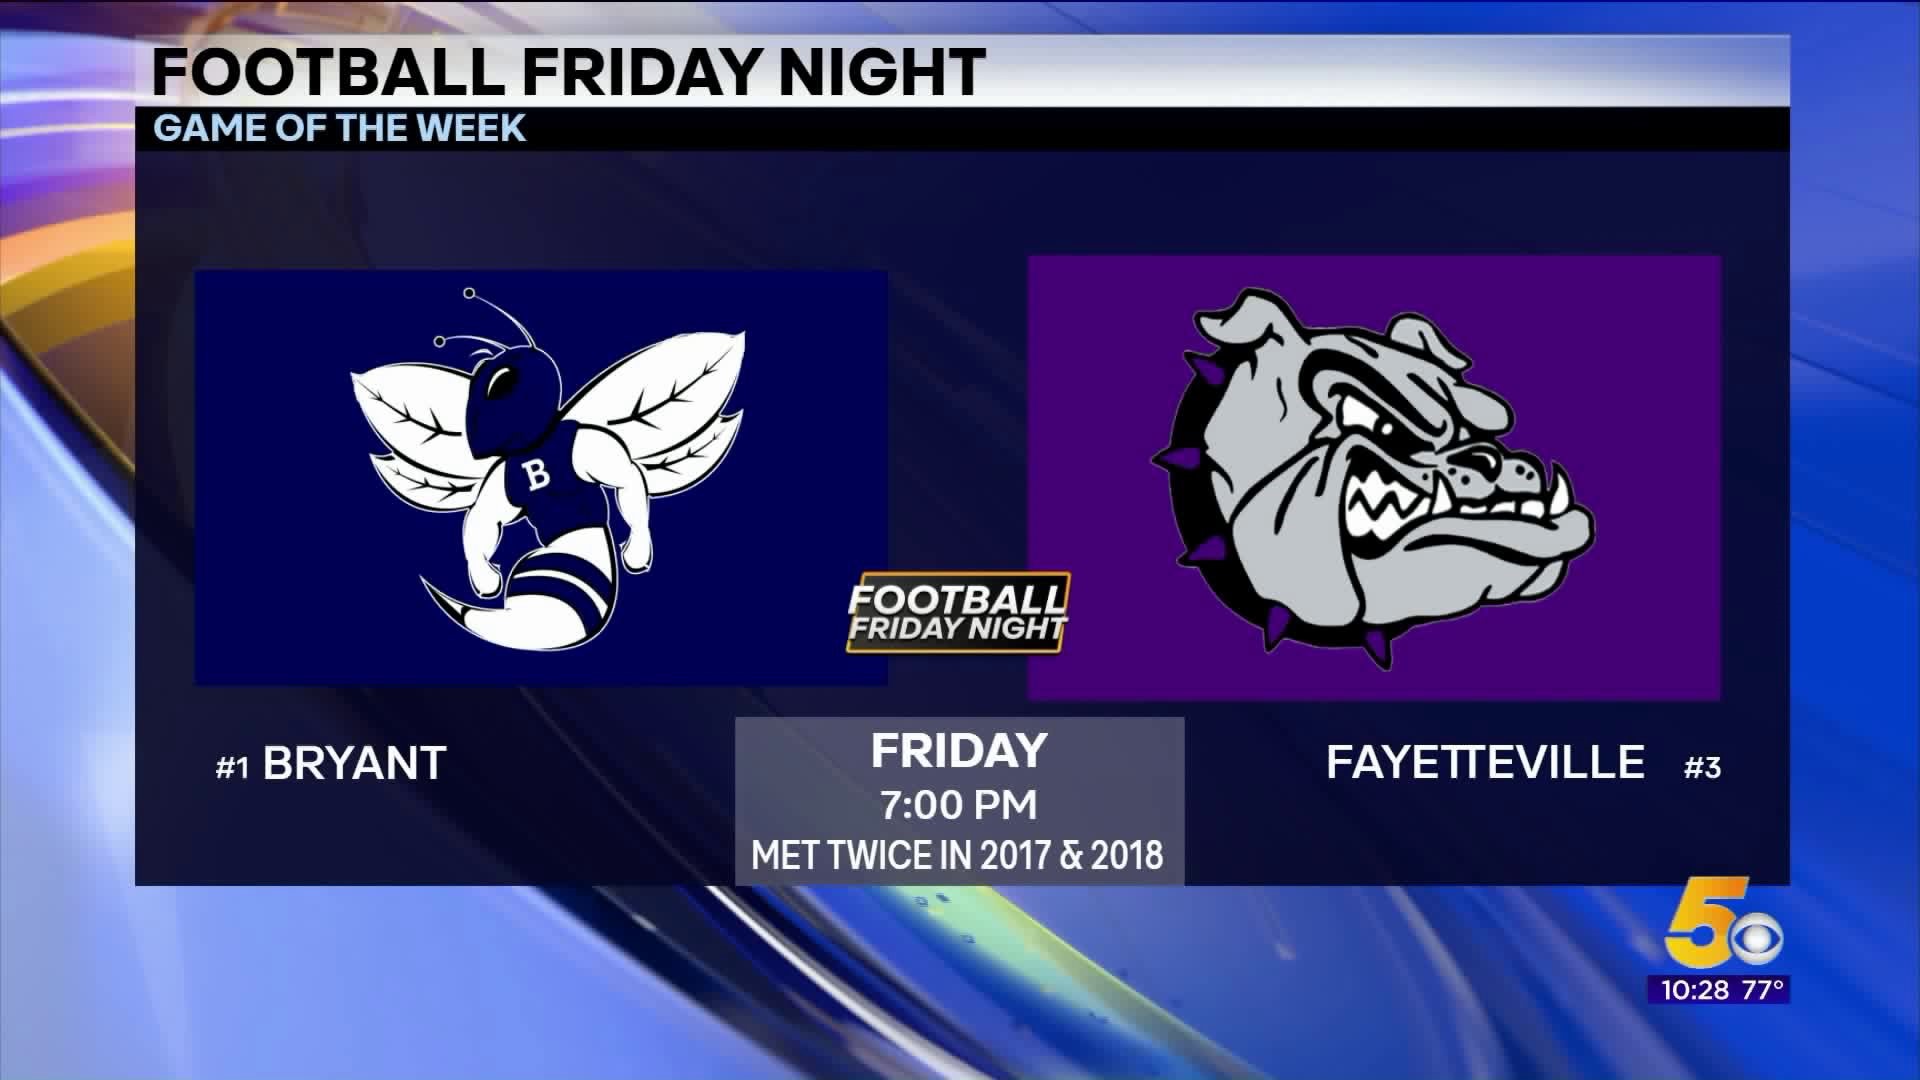 Game of the week preview